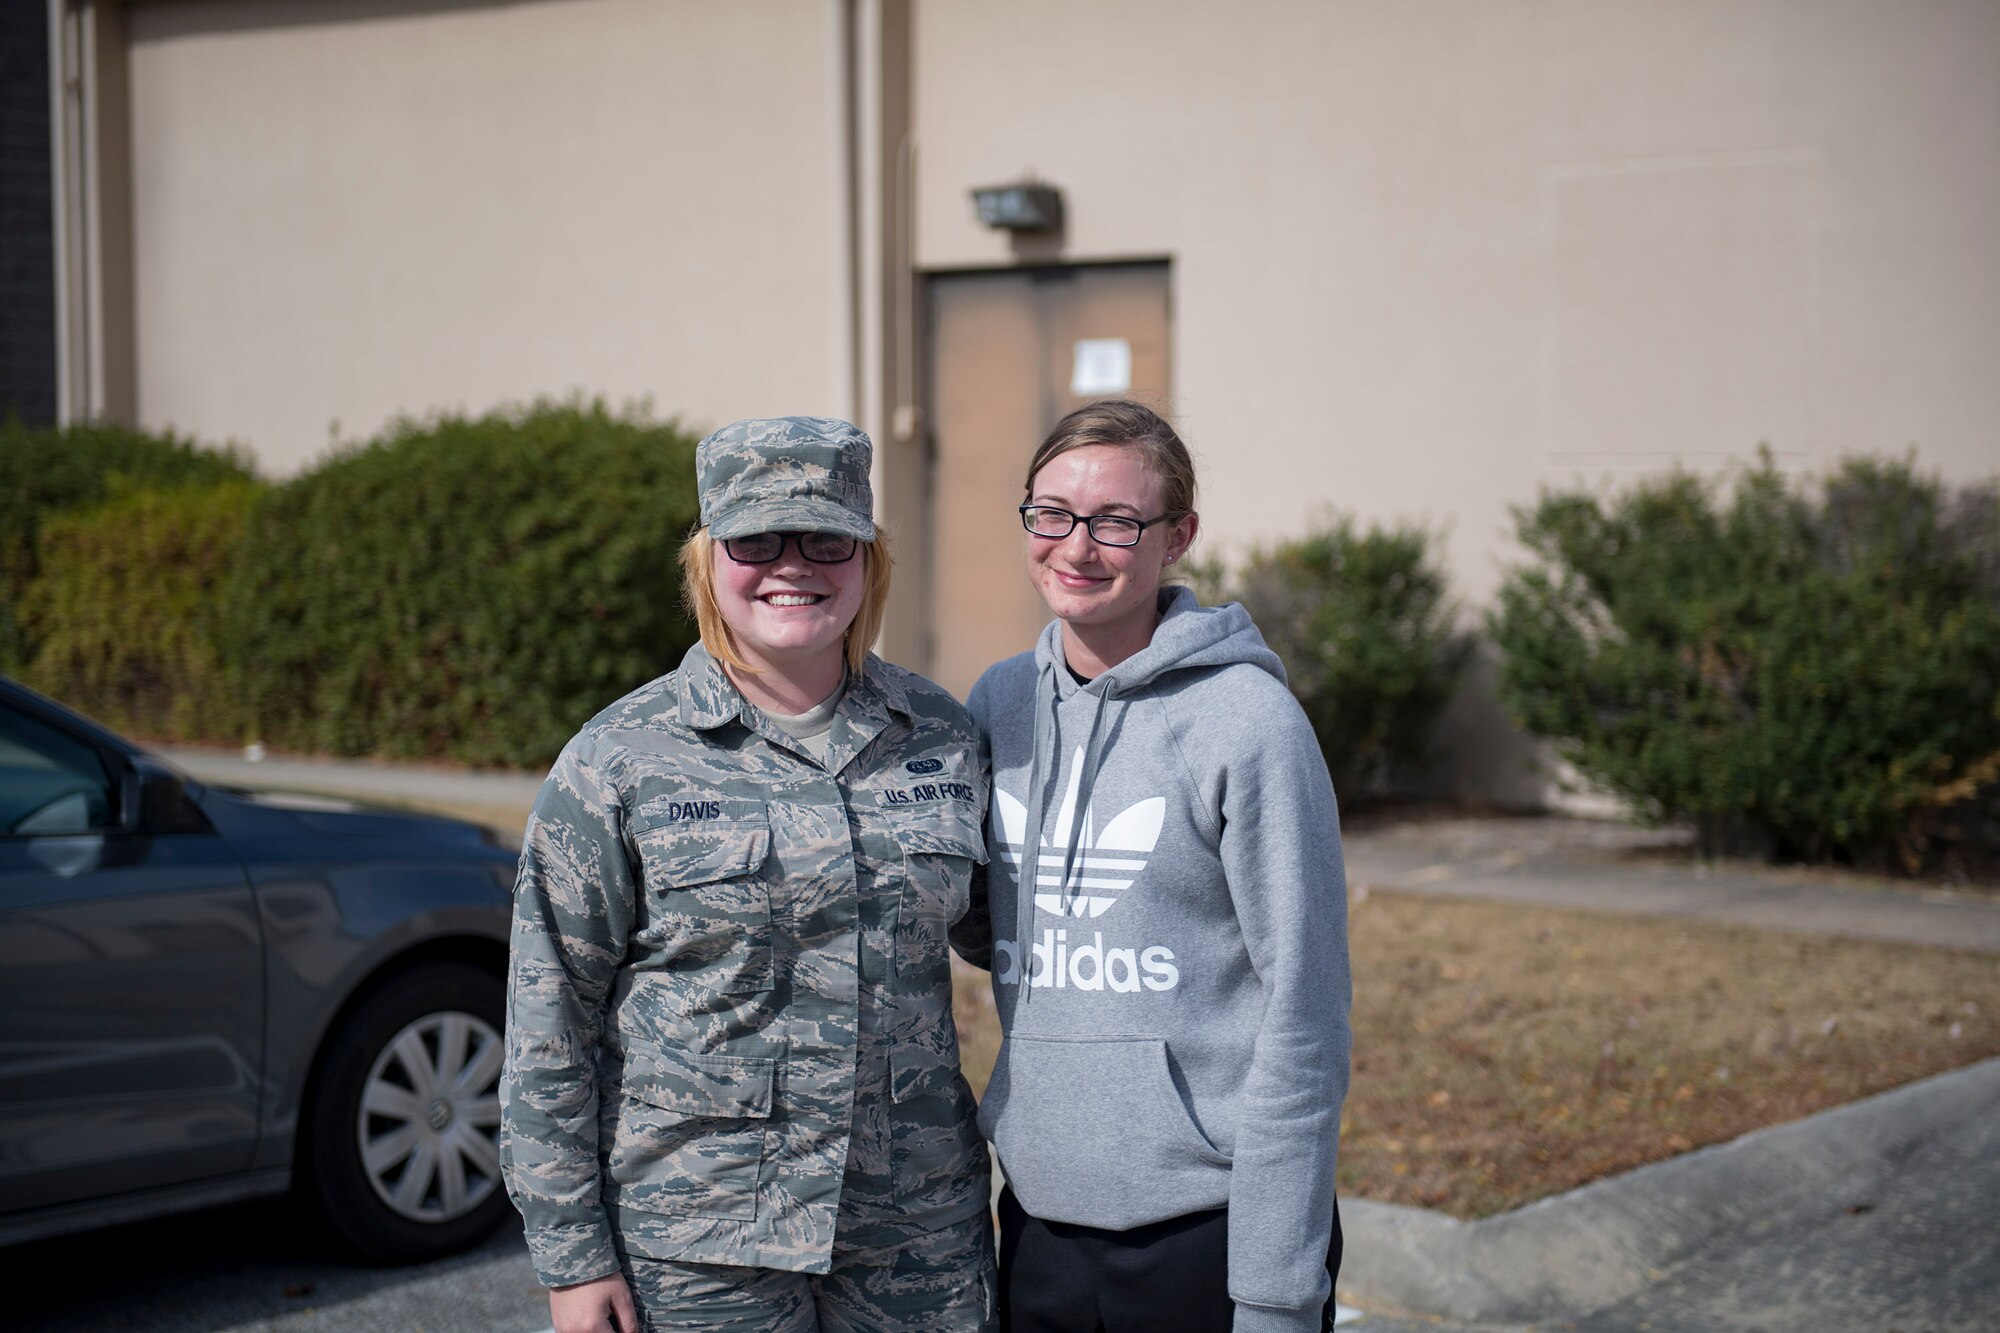 Airman Elizabeth Davis, left, 23d Communications Squadron knowledge management technician, and Airman 1st Class Ashley Moody, 23d CS client systems technician, pose for a photo, Nov. 30, 2016, at Moody Air Force Base, Ga. Davis joined the Air Force in February of 2015, with Moody’s reaction being that she’d never join the military. However, in May of 2016 after seeing Davis’s success, Moody followed her sister’s path and enlisted. (U.S. Air Force photo by Airman 1st Class Daniel Snider)